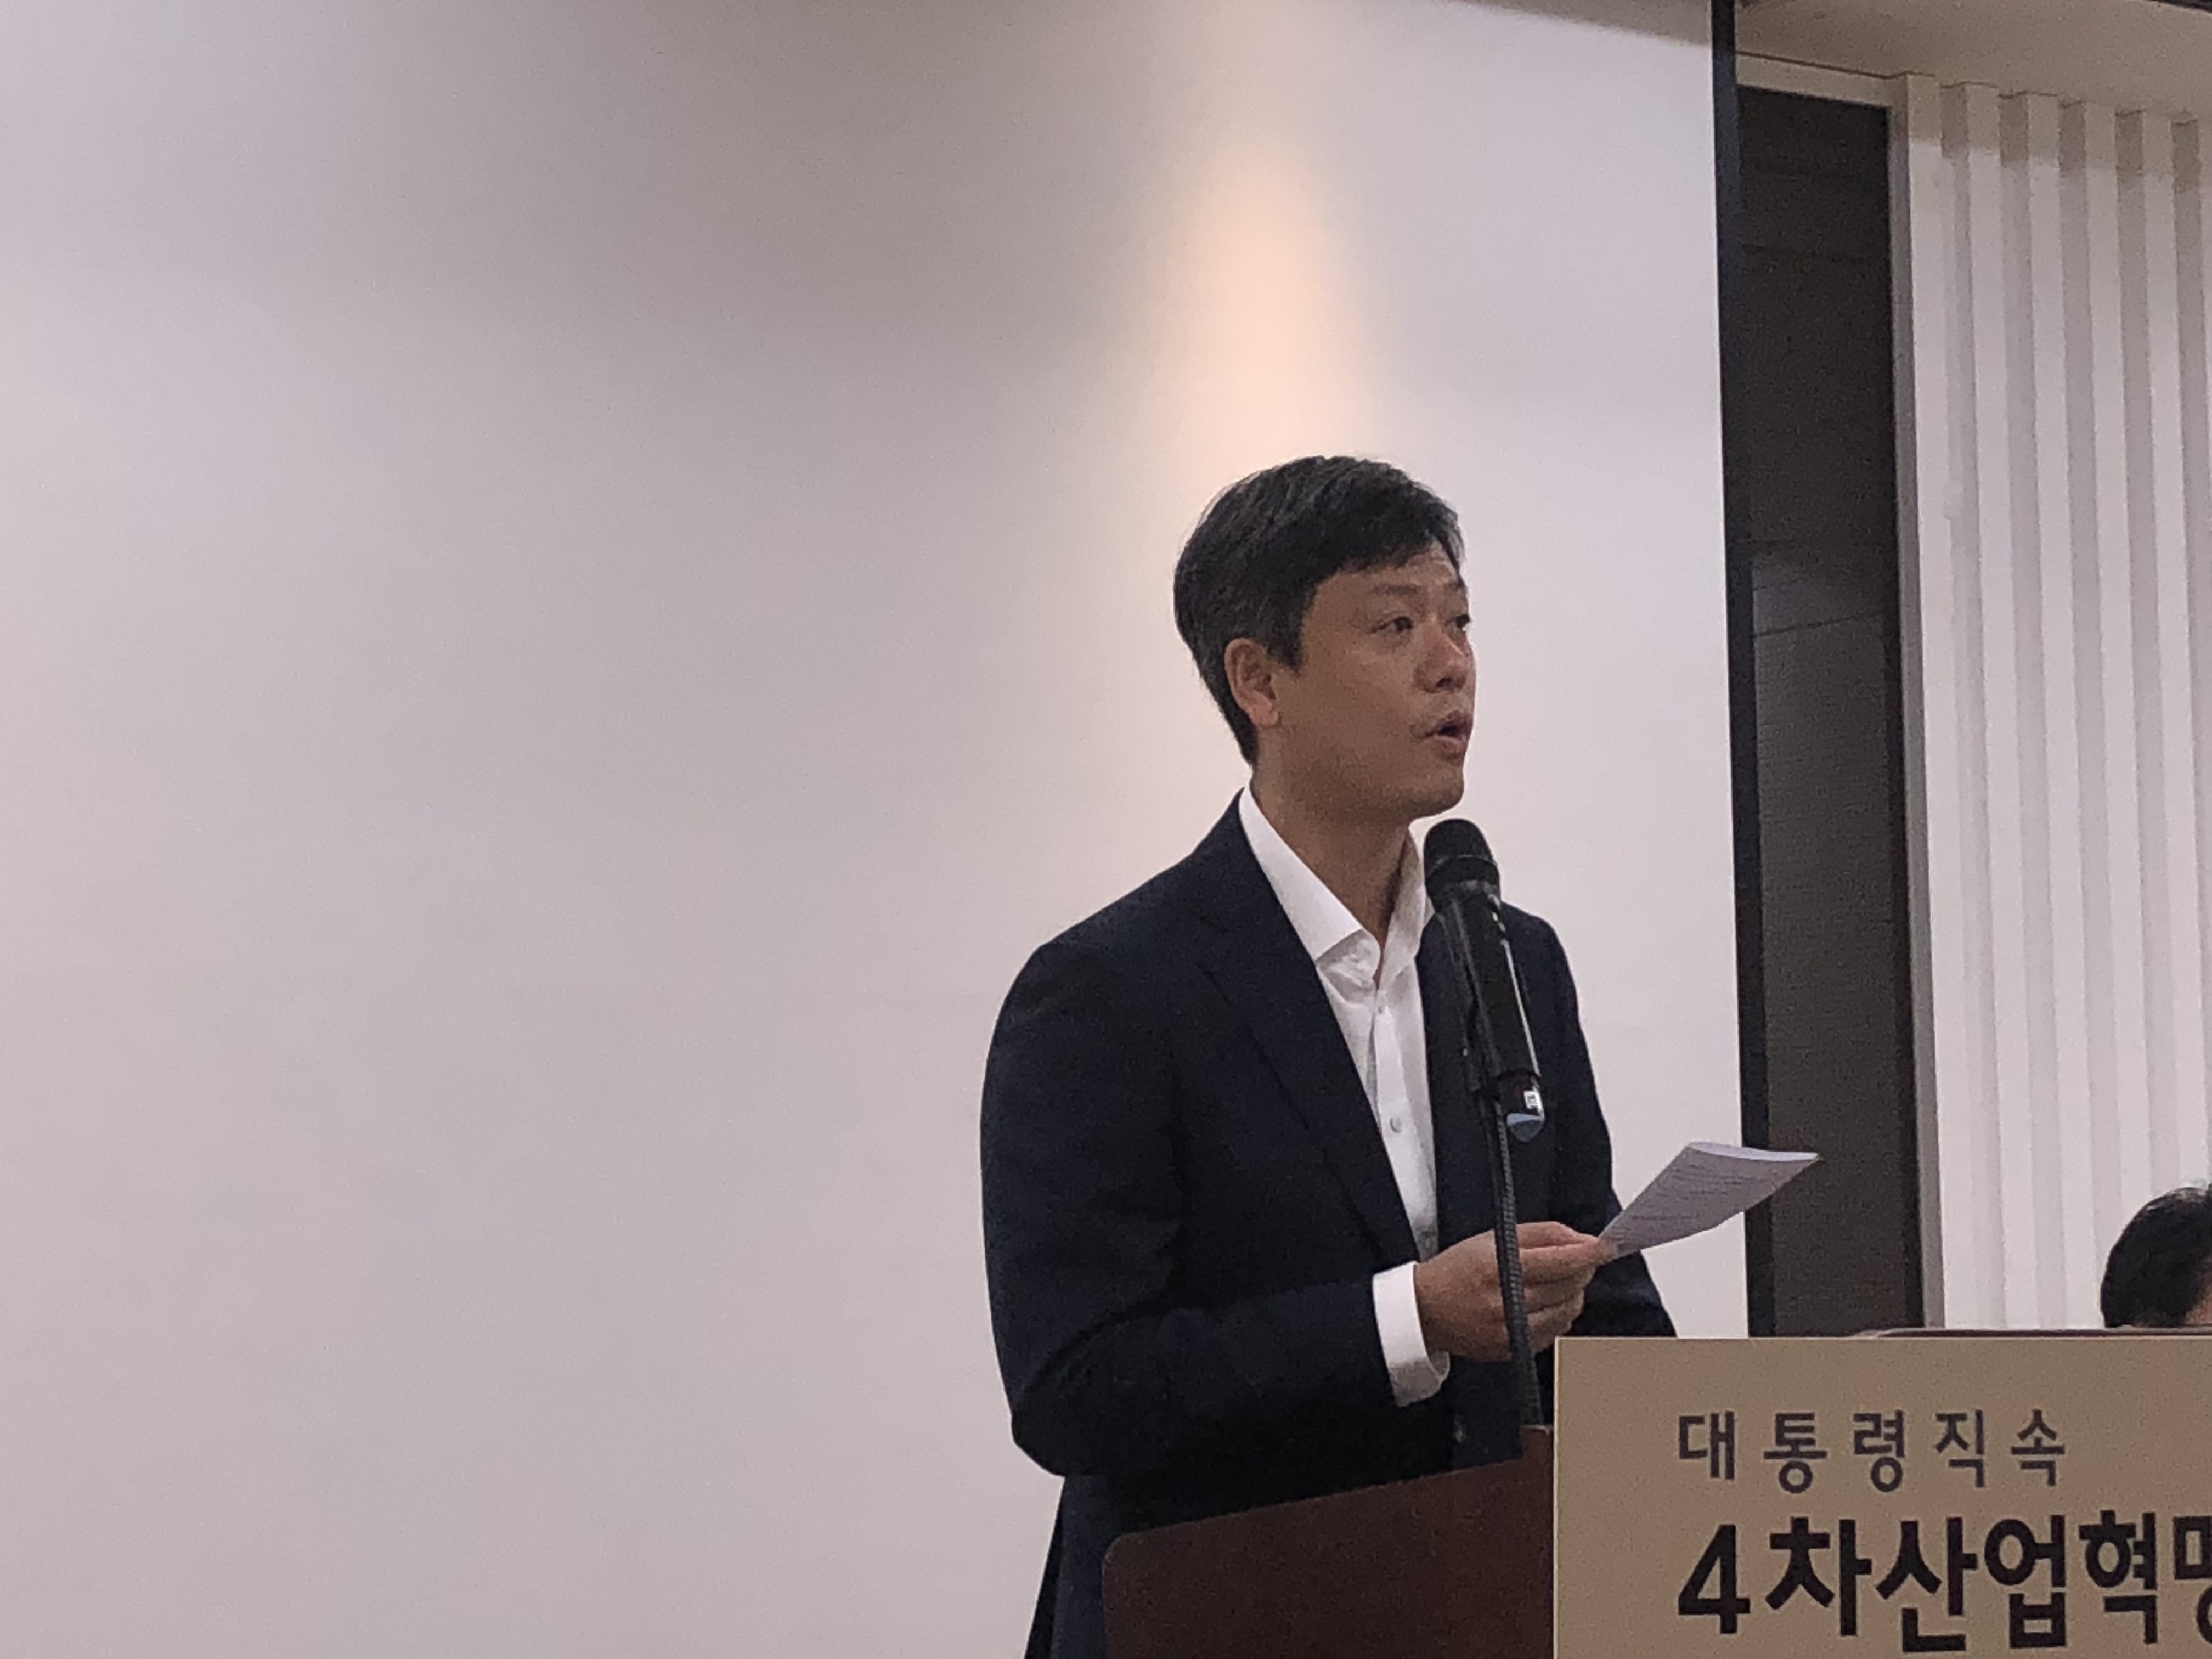 Last December, Jang, Byeonggyu, the chairman of Presidential Committee on the Fourth Industrial Revolution has announced that a proposal regarding ‘Blockchain and ICO’ will be made as the second committee of PCFIR was constituted